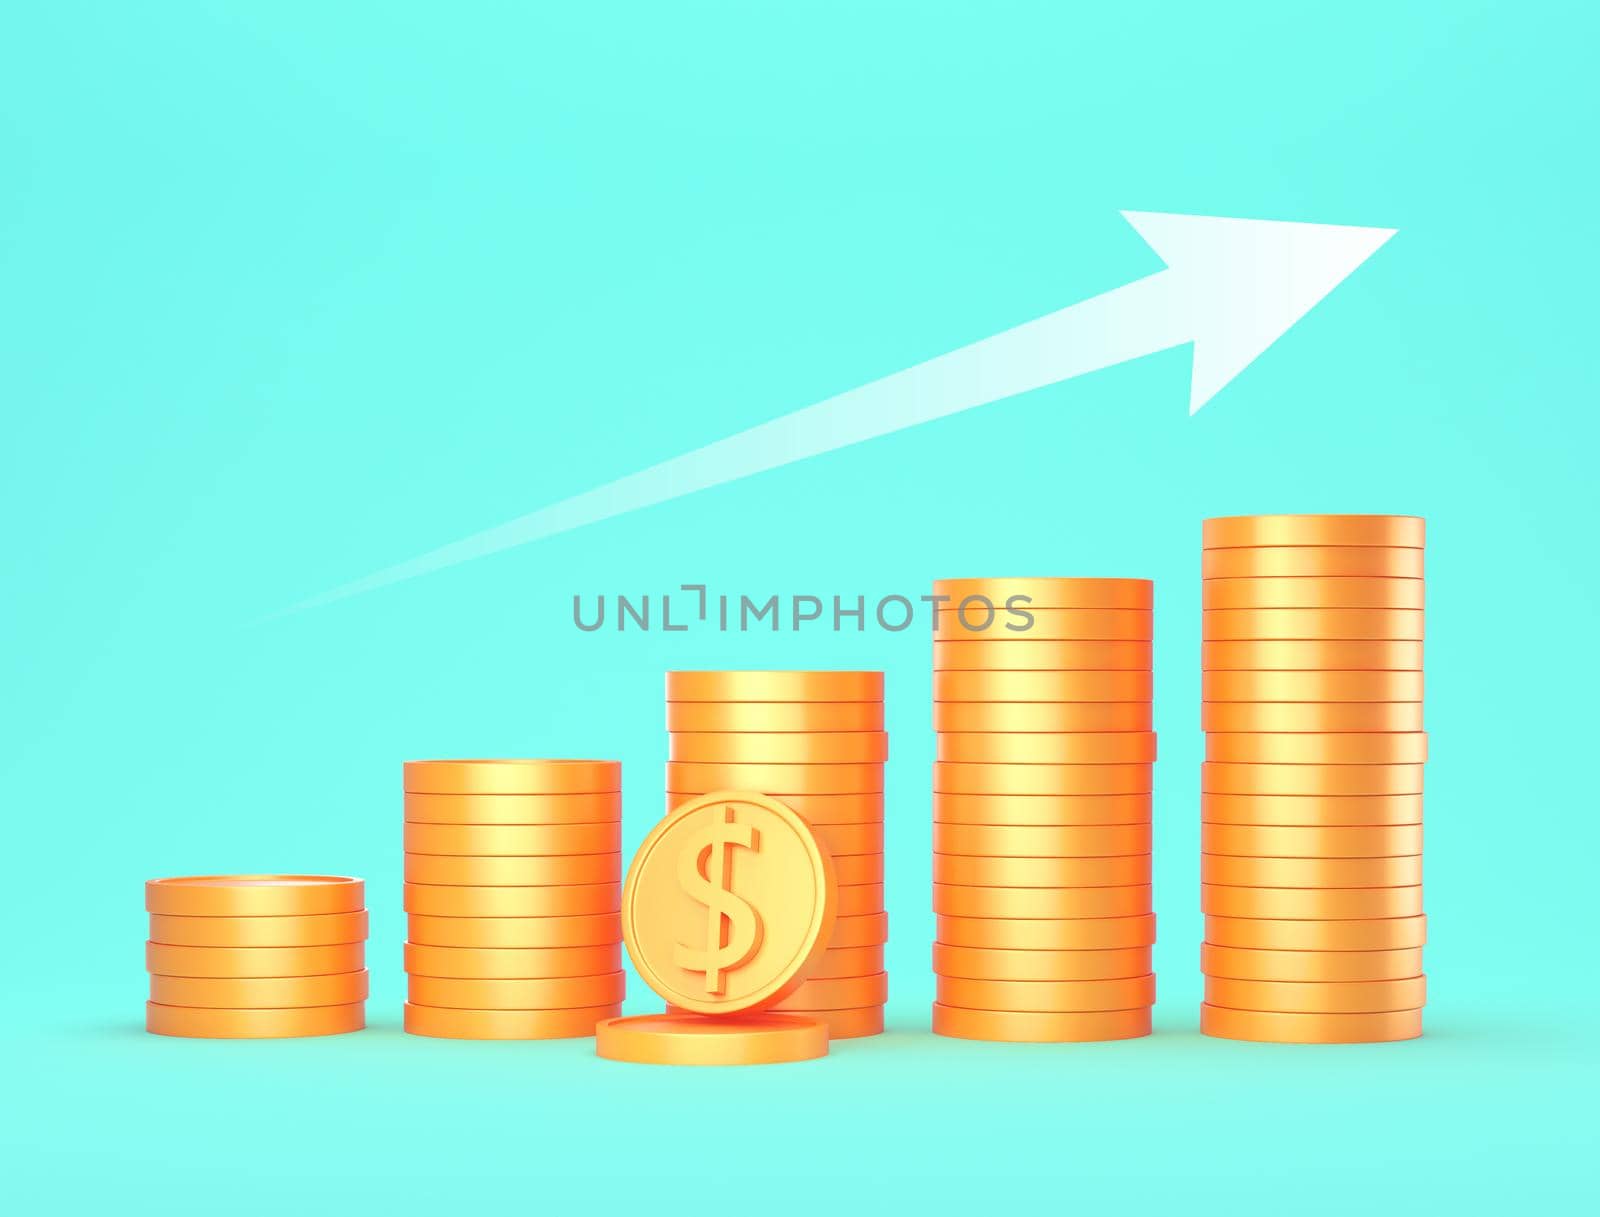 Growth Earnings and financial success concept - Gold coins and white arrow isolated on blue background . 3d render